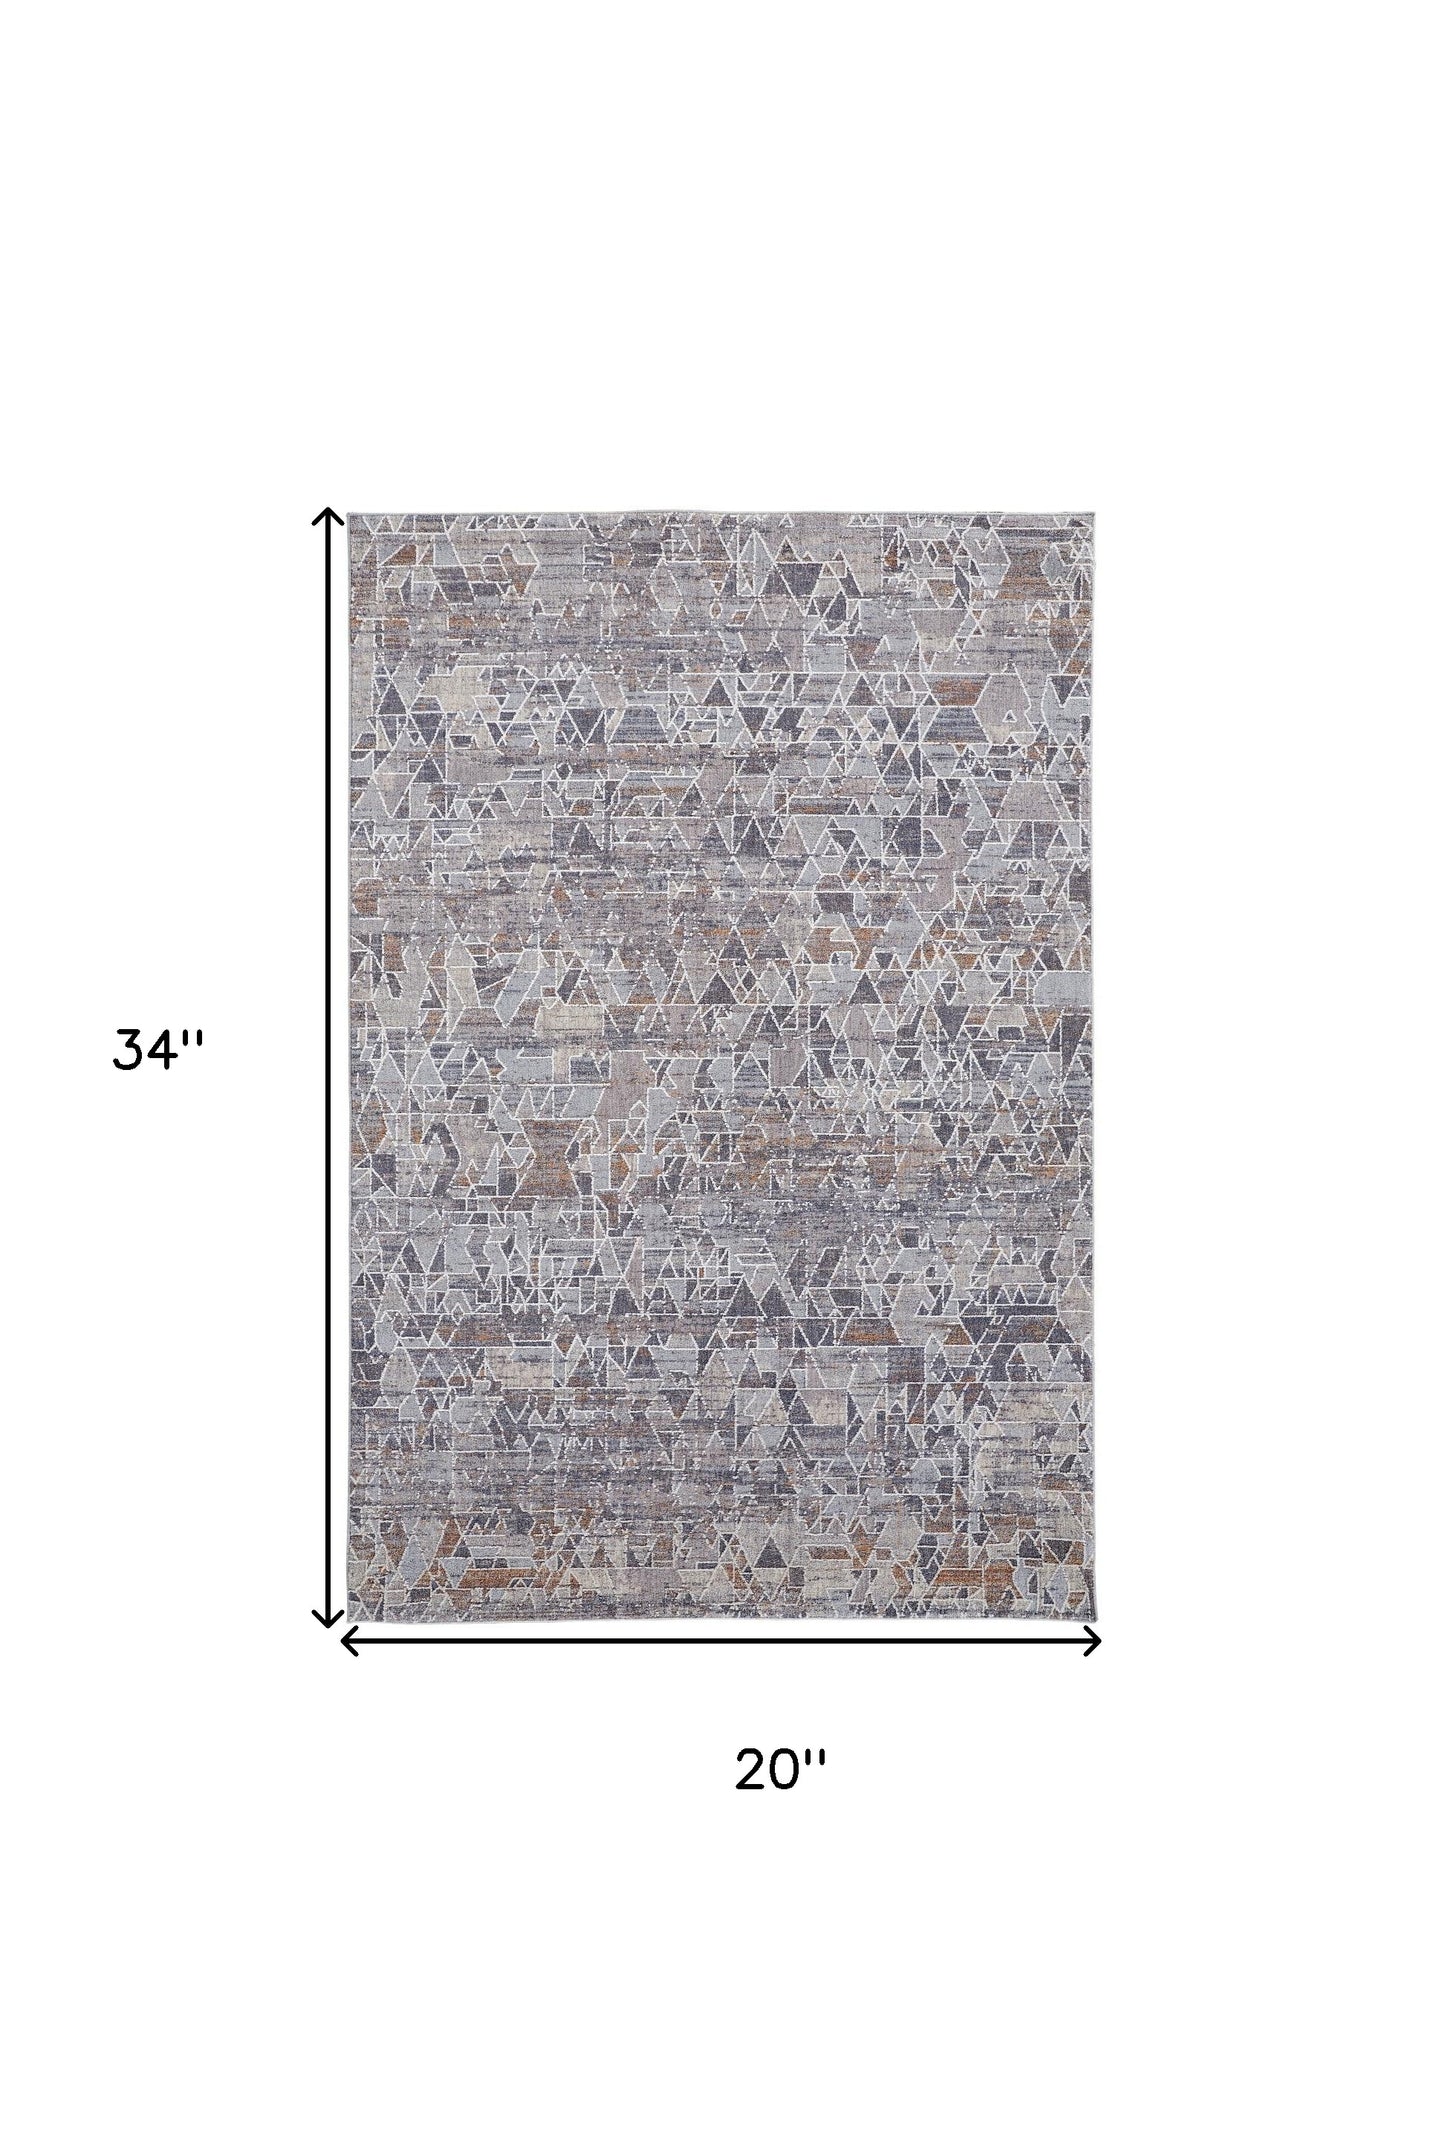 7' X 9' Gray Blue And Orange Abstract Power Loom Distressed Stain Resistant Area Rug